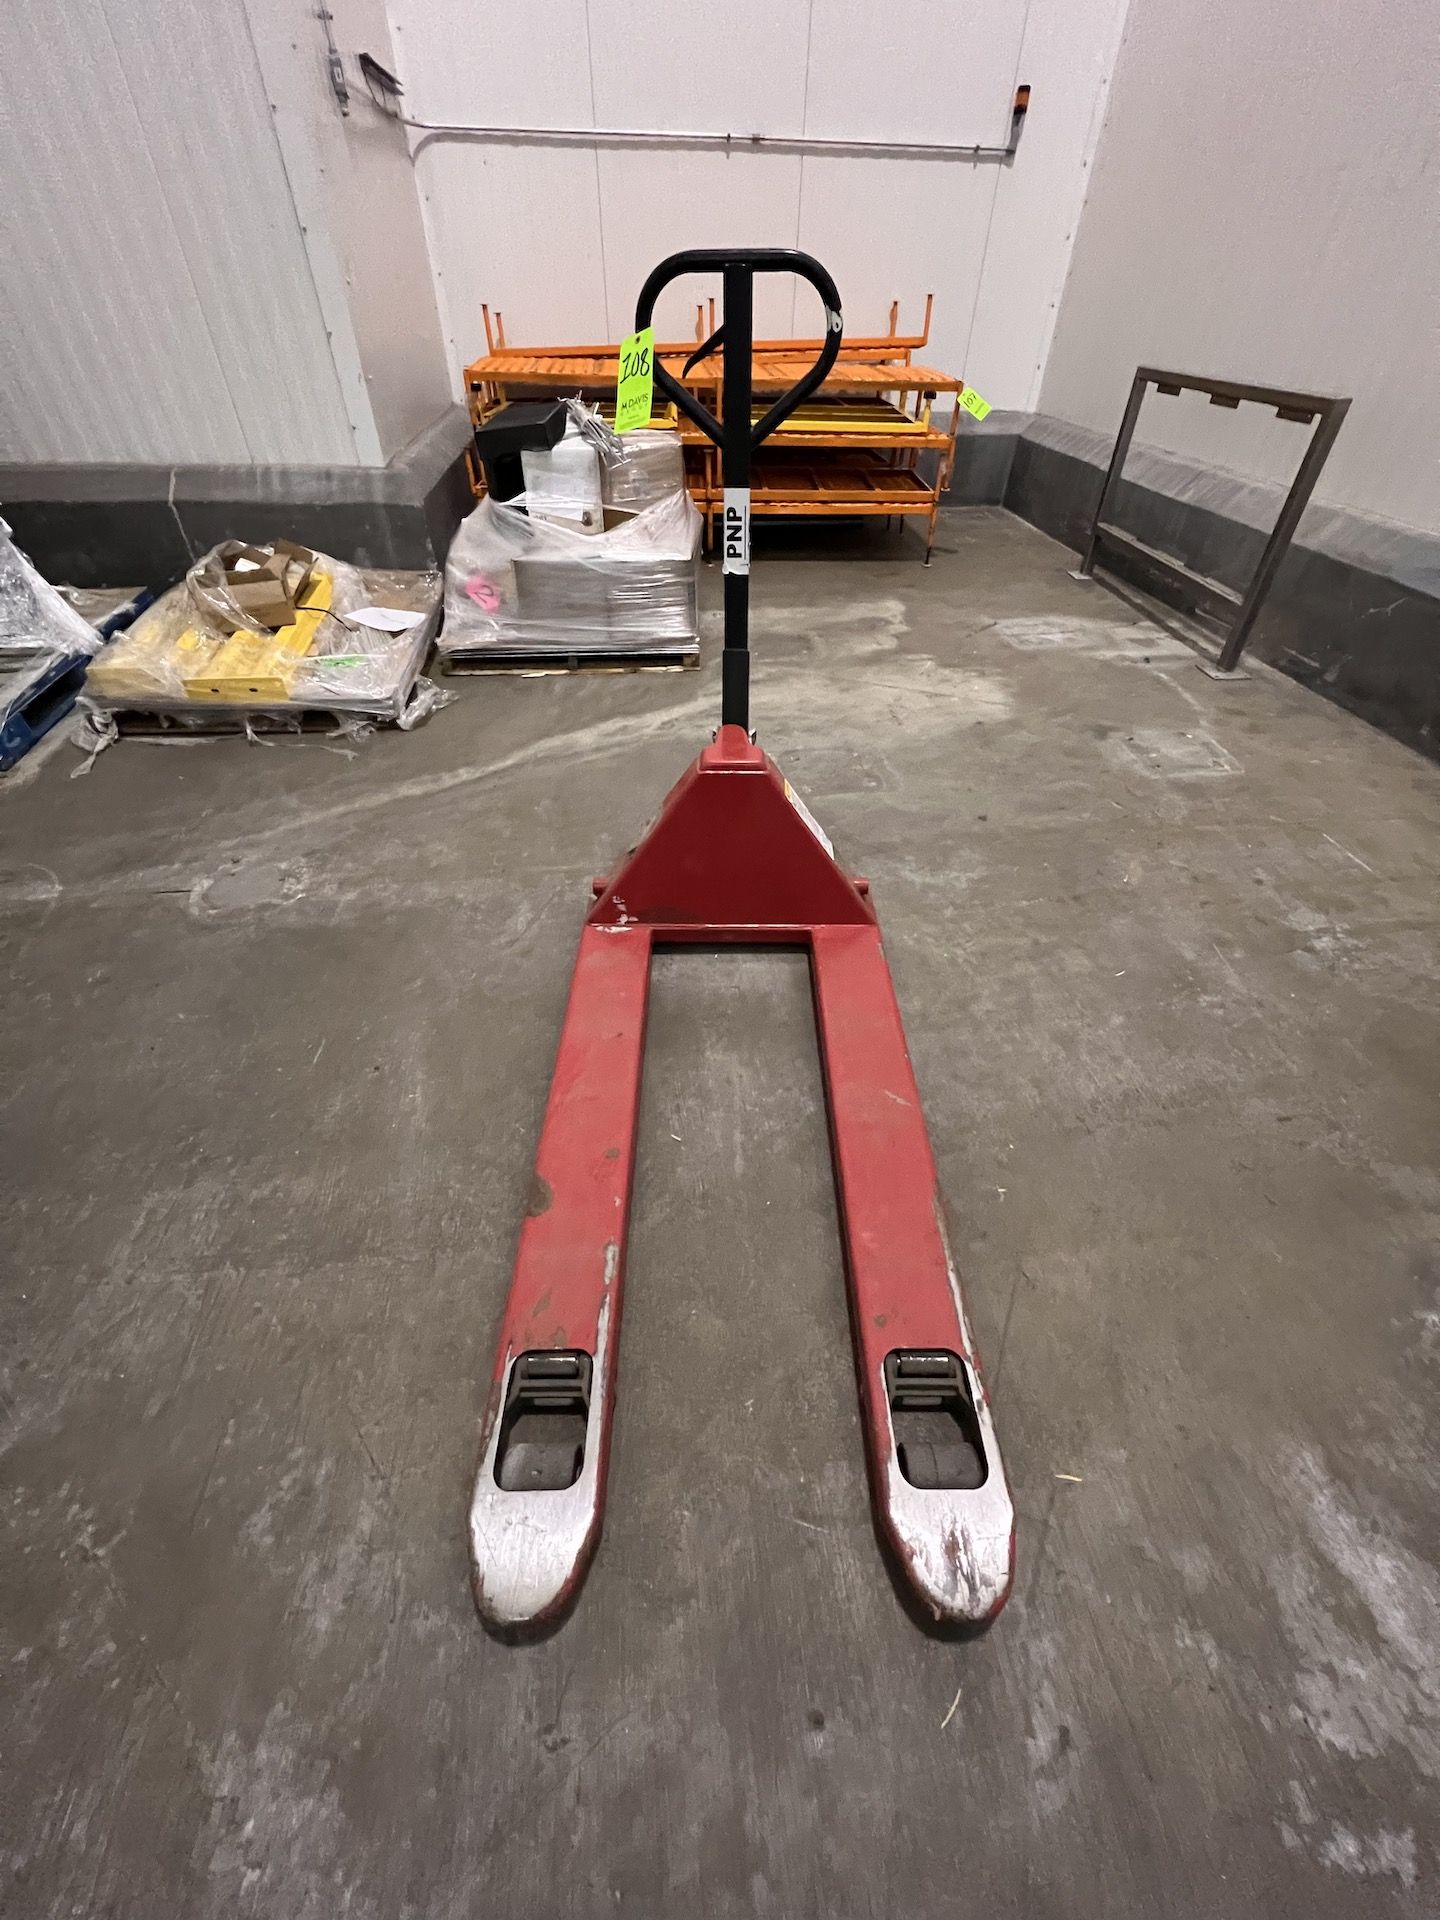 PALLET JACK(RIGGING & SIMPLE LOADING FEE $10.00) (NOTE: DOES NOT INCLUDE SKIDDING OR PACKAGING WILL